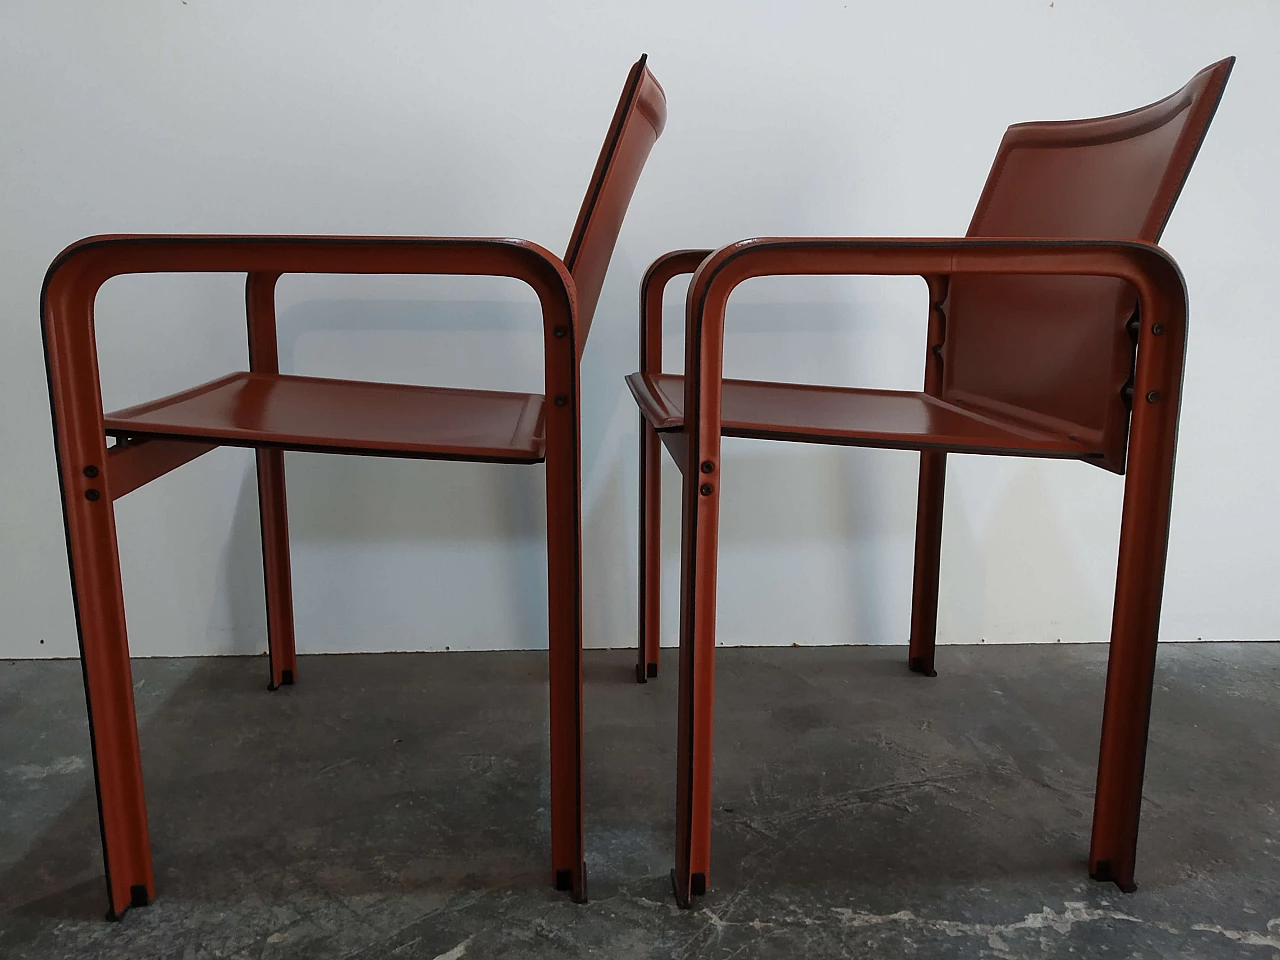 Pair of Golfo dei Poeti chairs by Toussaint & Angeloni manufactured by Matteo Grassi, 1980s 24